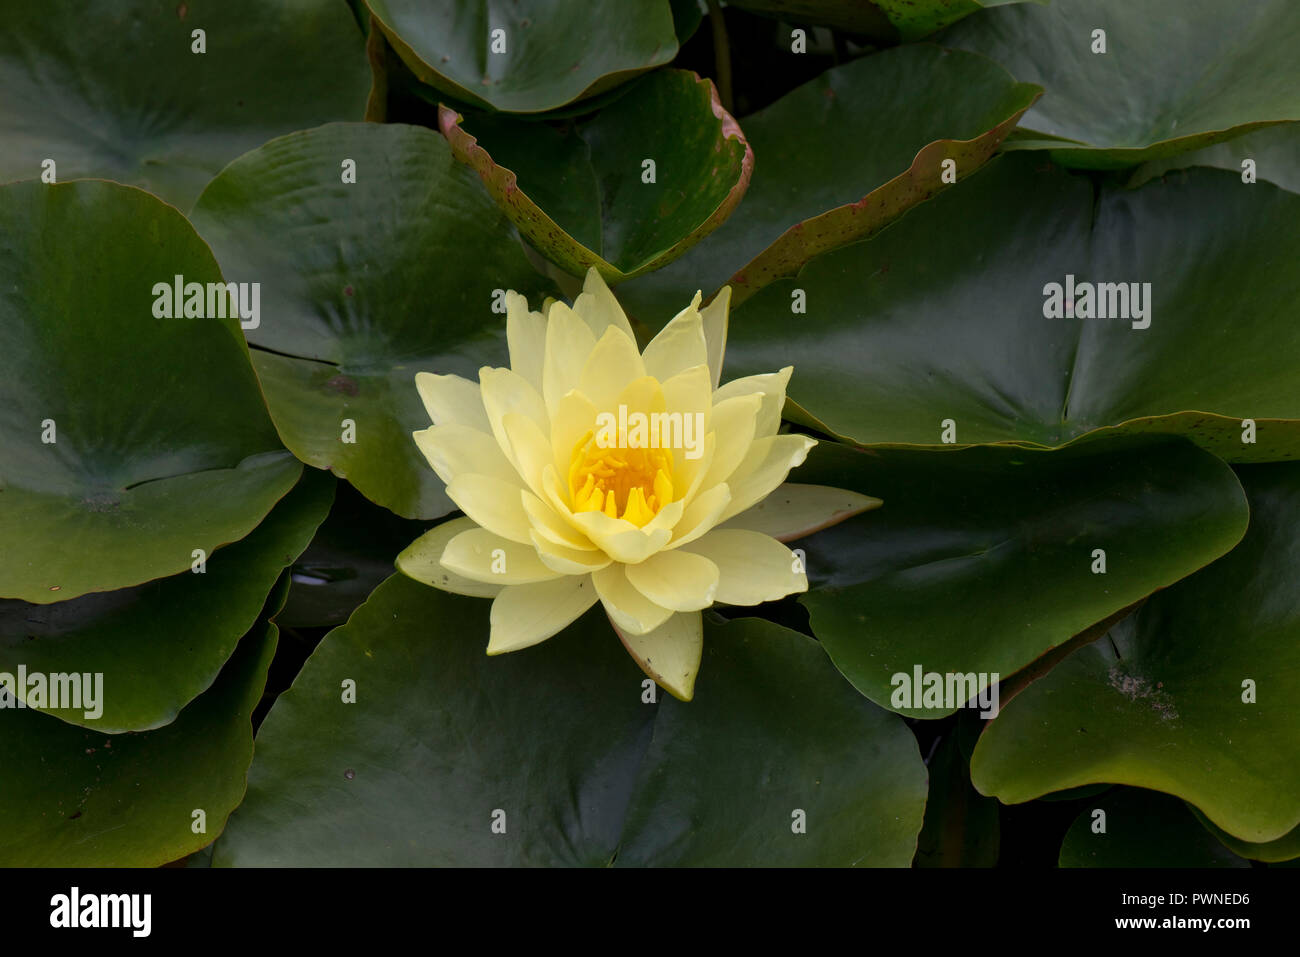 Yellow water lily, Nymphaea sp., flowering among profuse leaves on a garden pond in summer, Berkshire, August Stock Photo